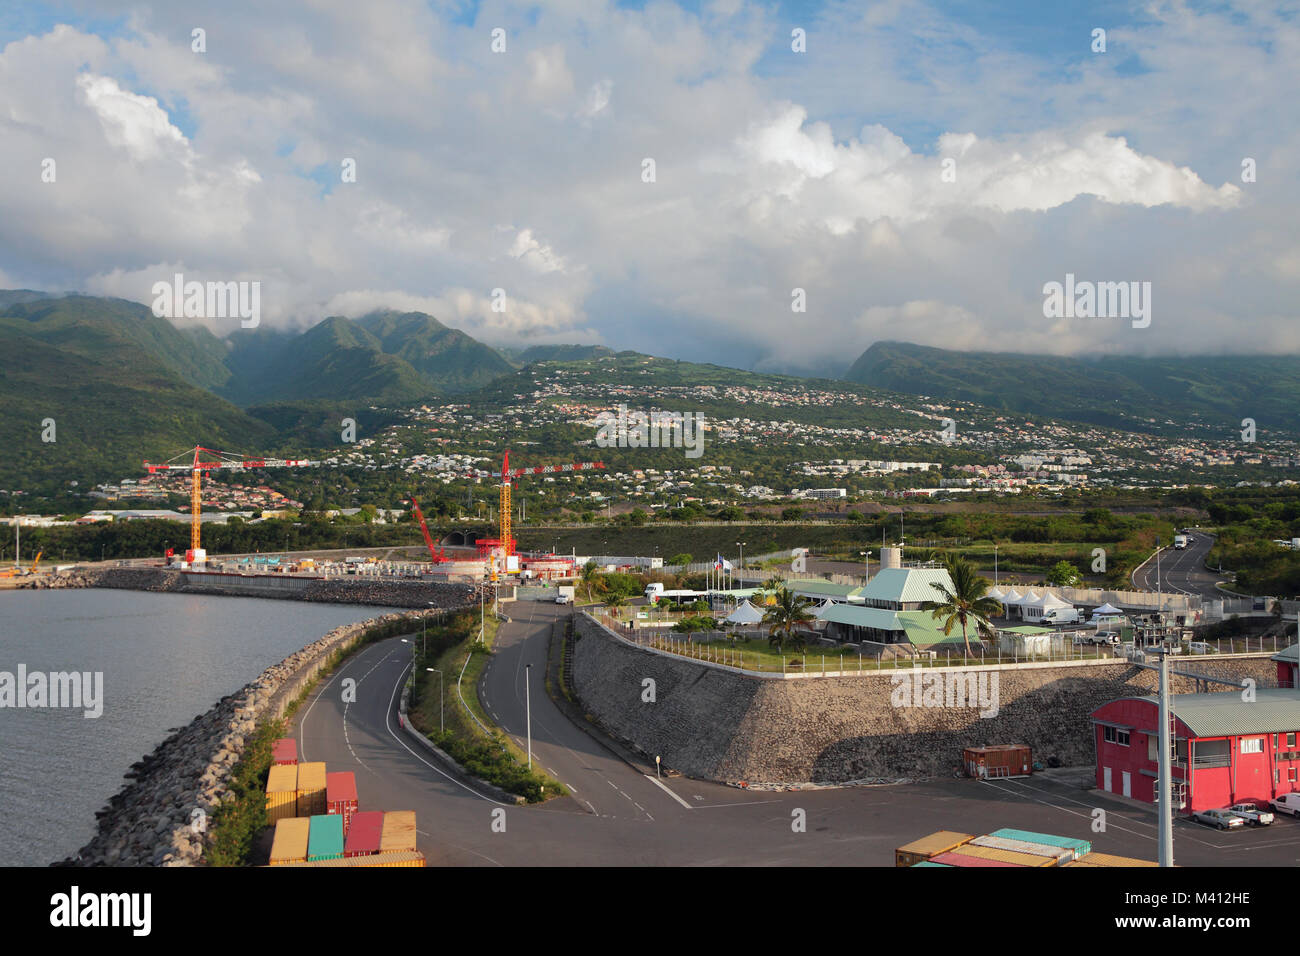 Seaport at foot of mountains. Zone Industrielle ZI, Reunion Stock Photo